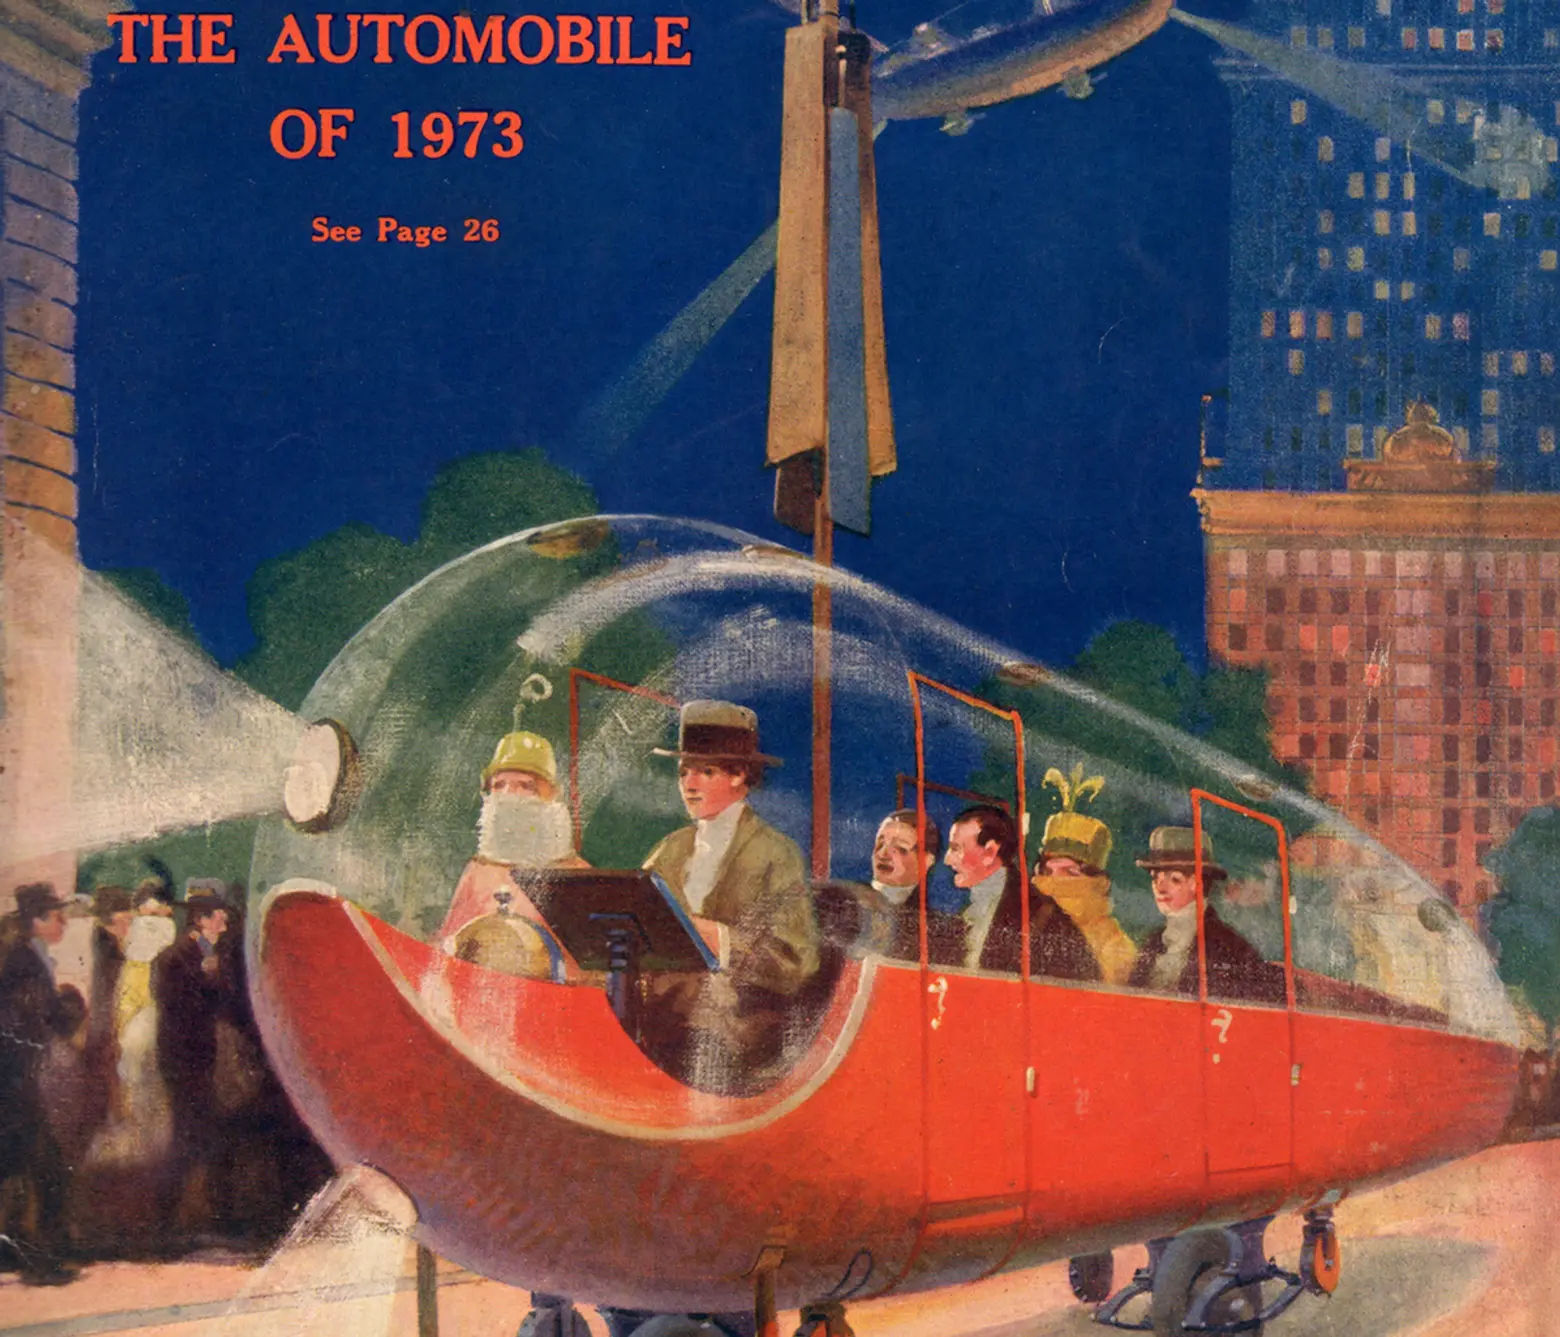 In 1923, scientists thought flying cars would solve NYC’s traffic snarls by 1973